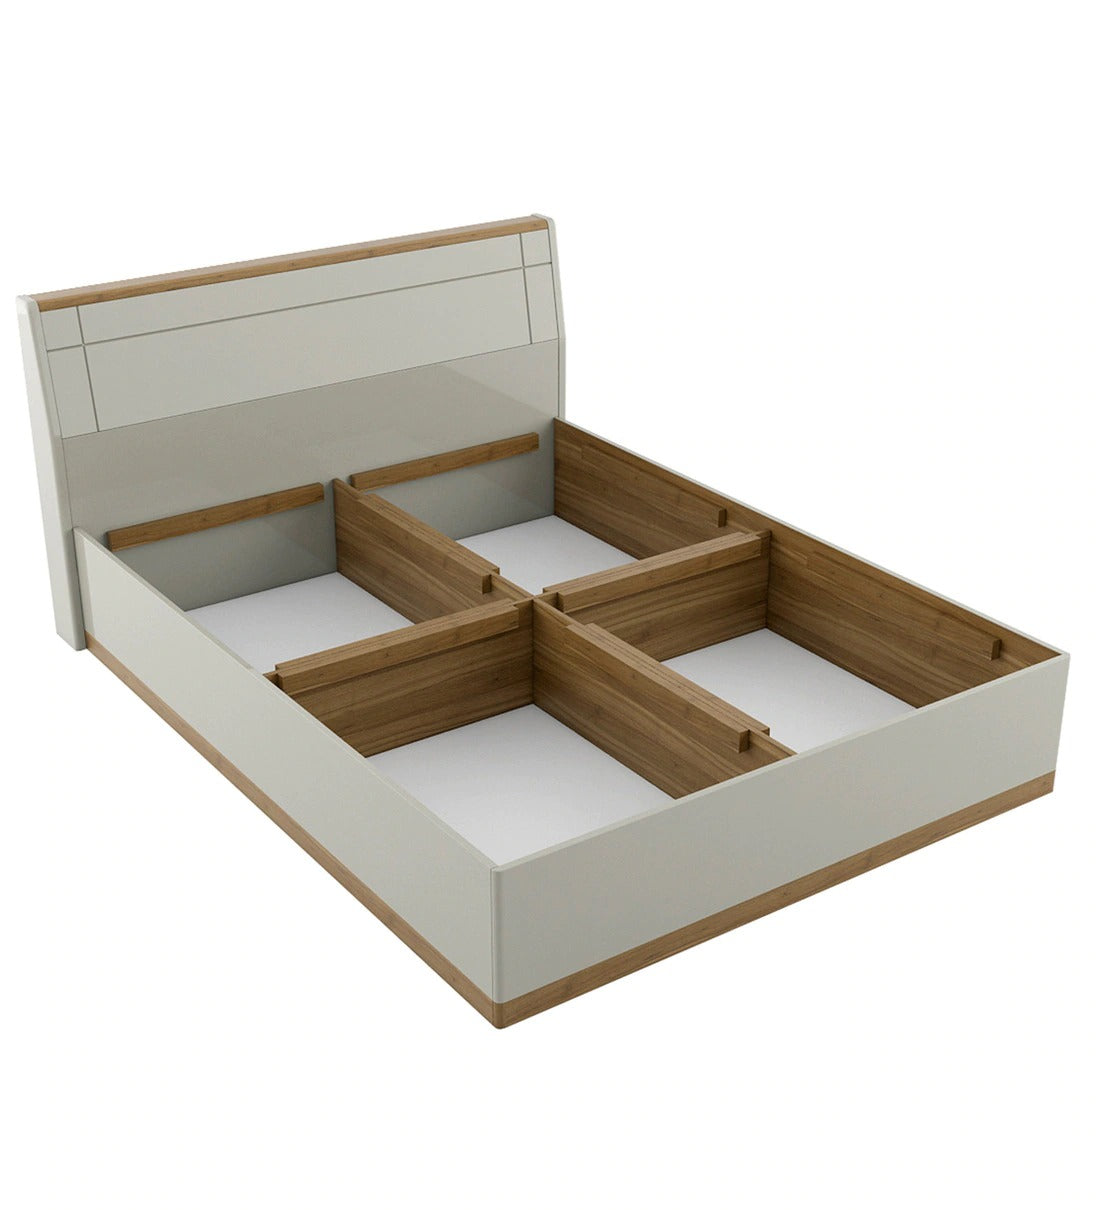 Detec™ Queen Size Bed with Storage in Natural Teak Wood Finish